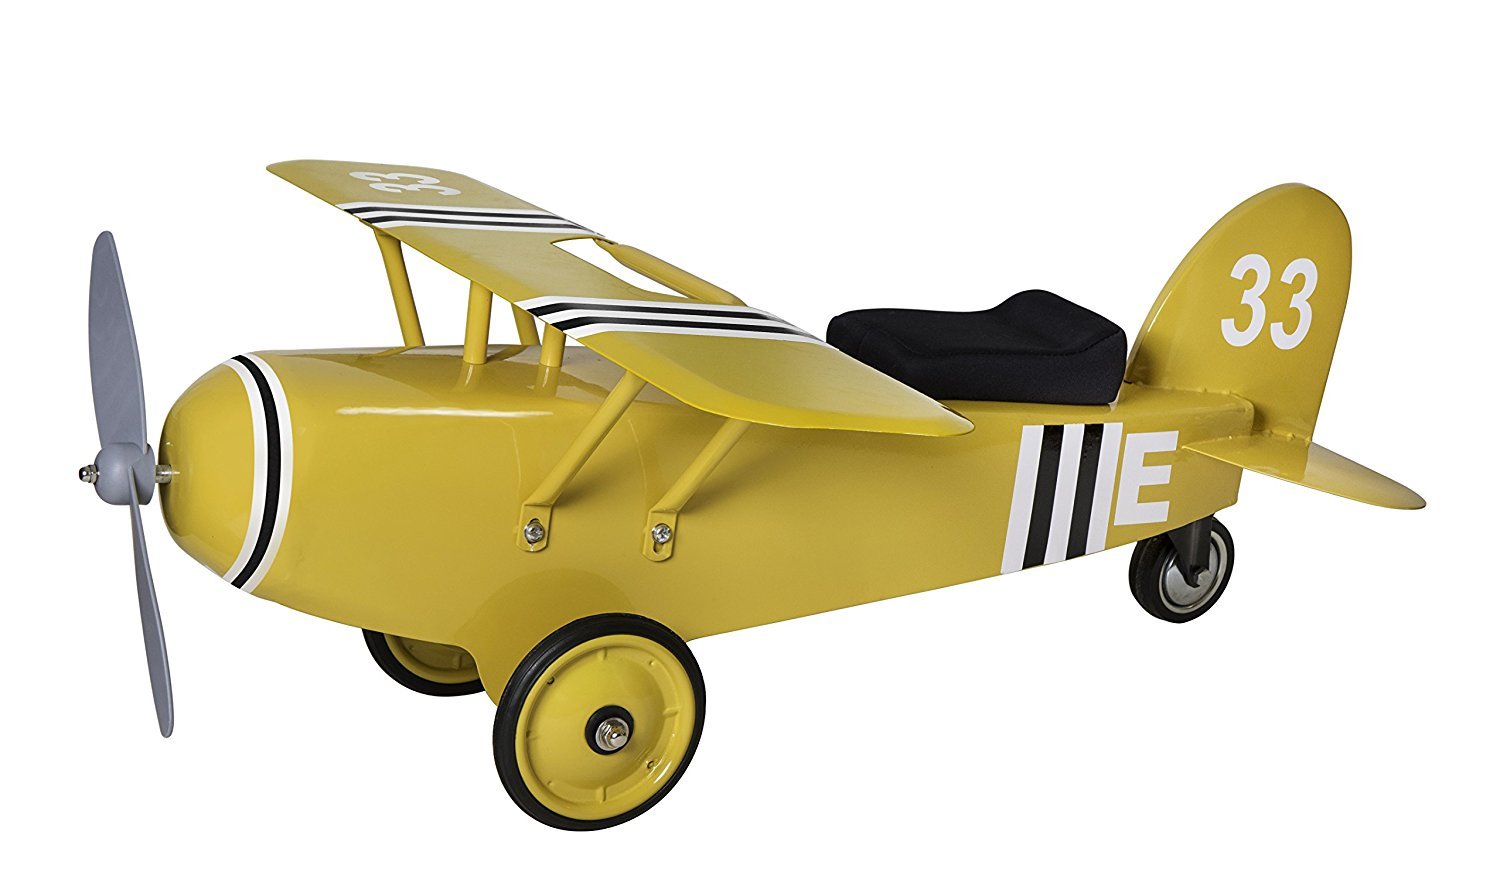 Morgan Cycle Yellow 33 Airplane Scoot Foot To Floor Ride-On Toy 71133 - Upzy.com